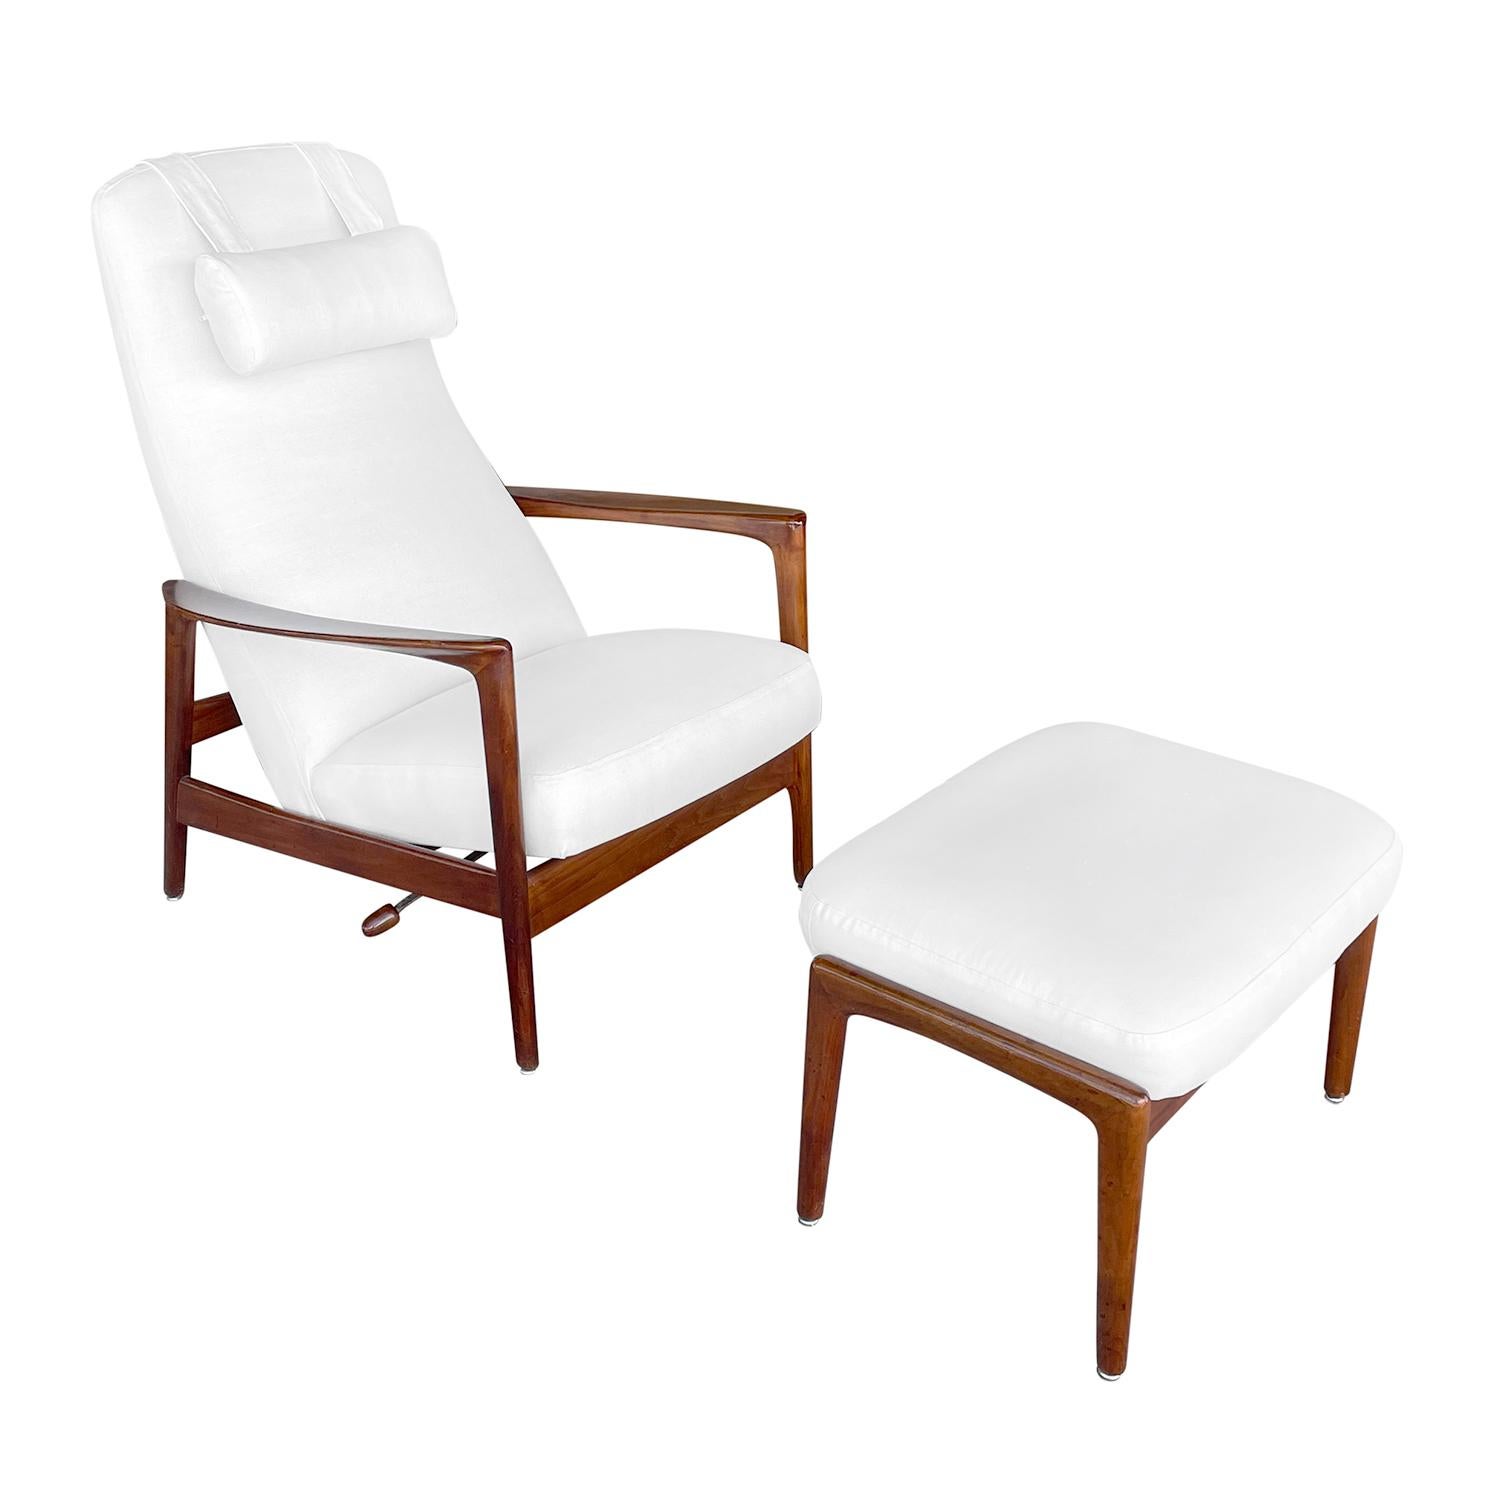 A vintage Mid-Century Modern Swedish armchair or high back recliner with a head rest and an ottoman, made of hand carved Walnut, produced by DUX in good condition. The reclining arms are slightly curved, standing on four angled wooden legs which are